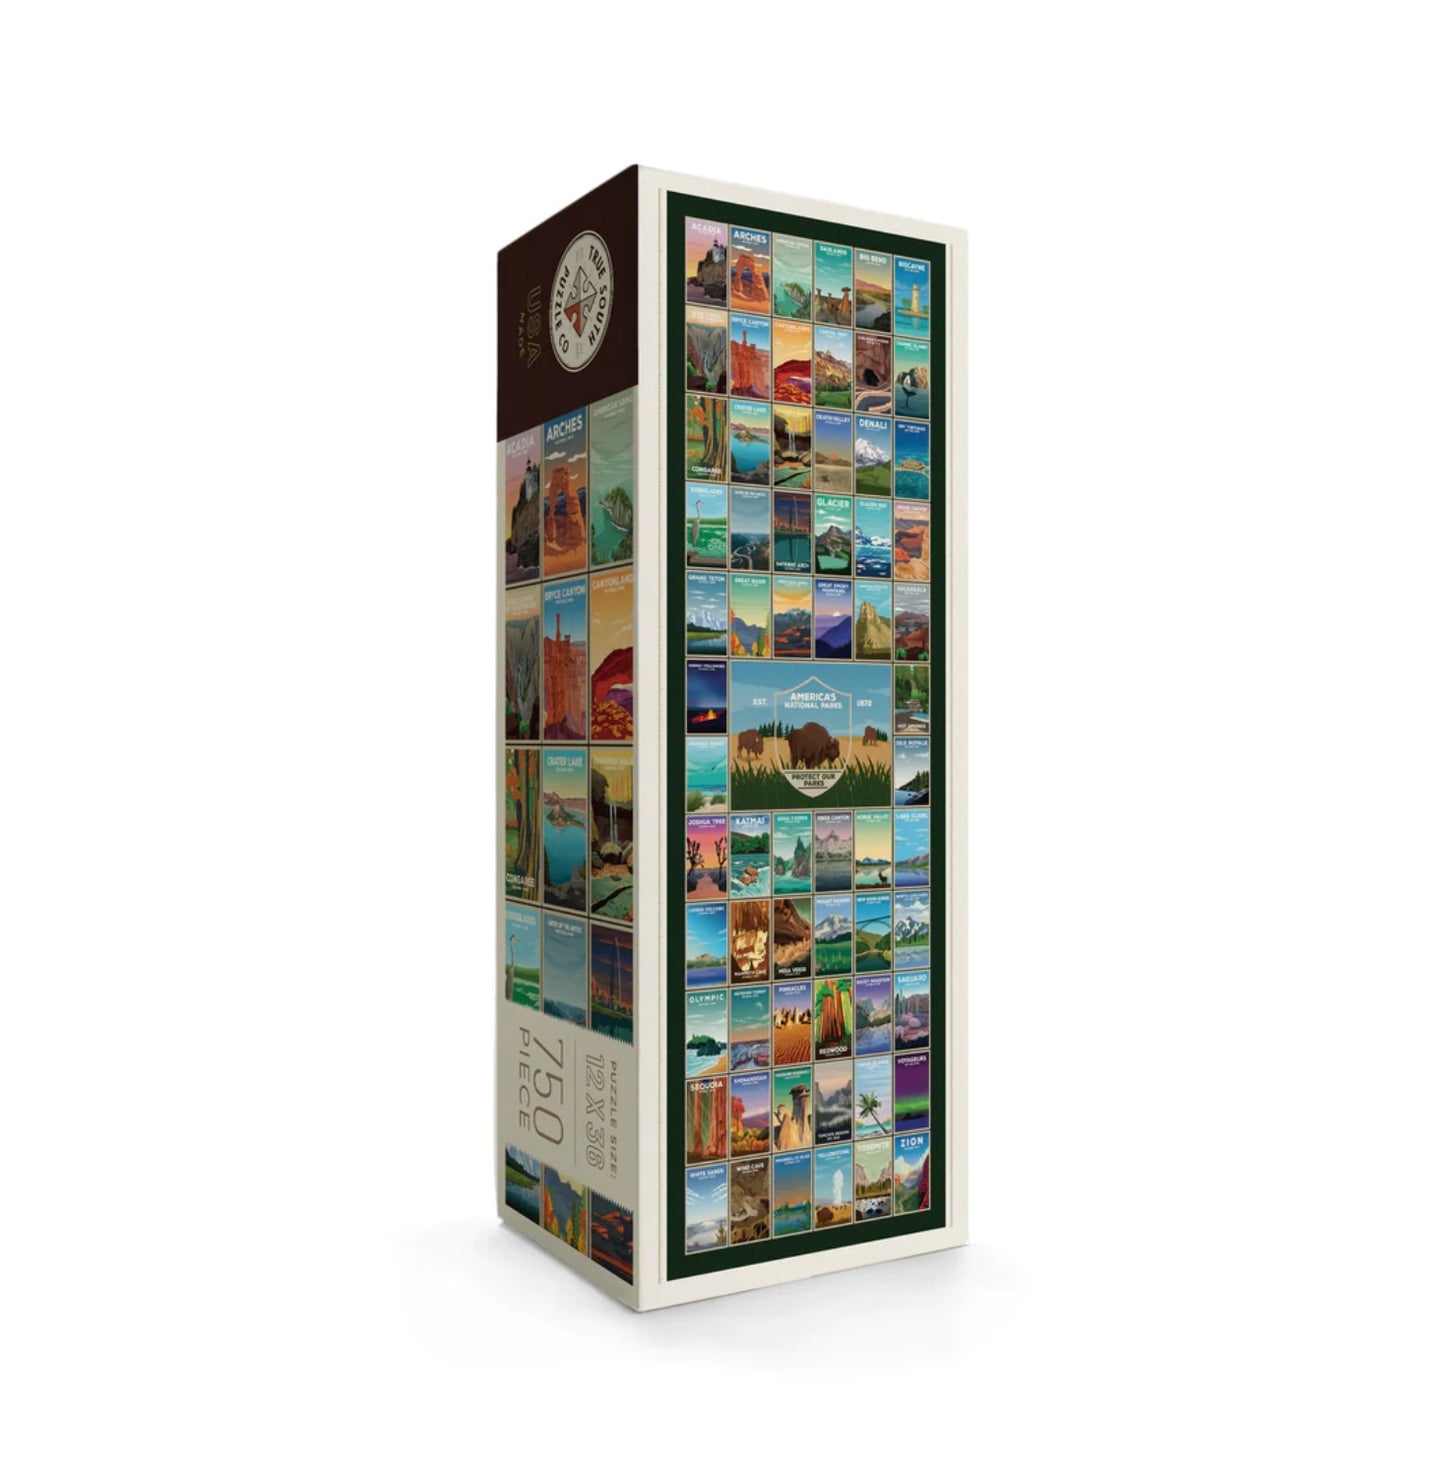 AMERICA'S NATIONAL PARKS - PANO 750 JIGSAW PUZZLE